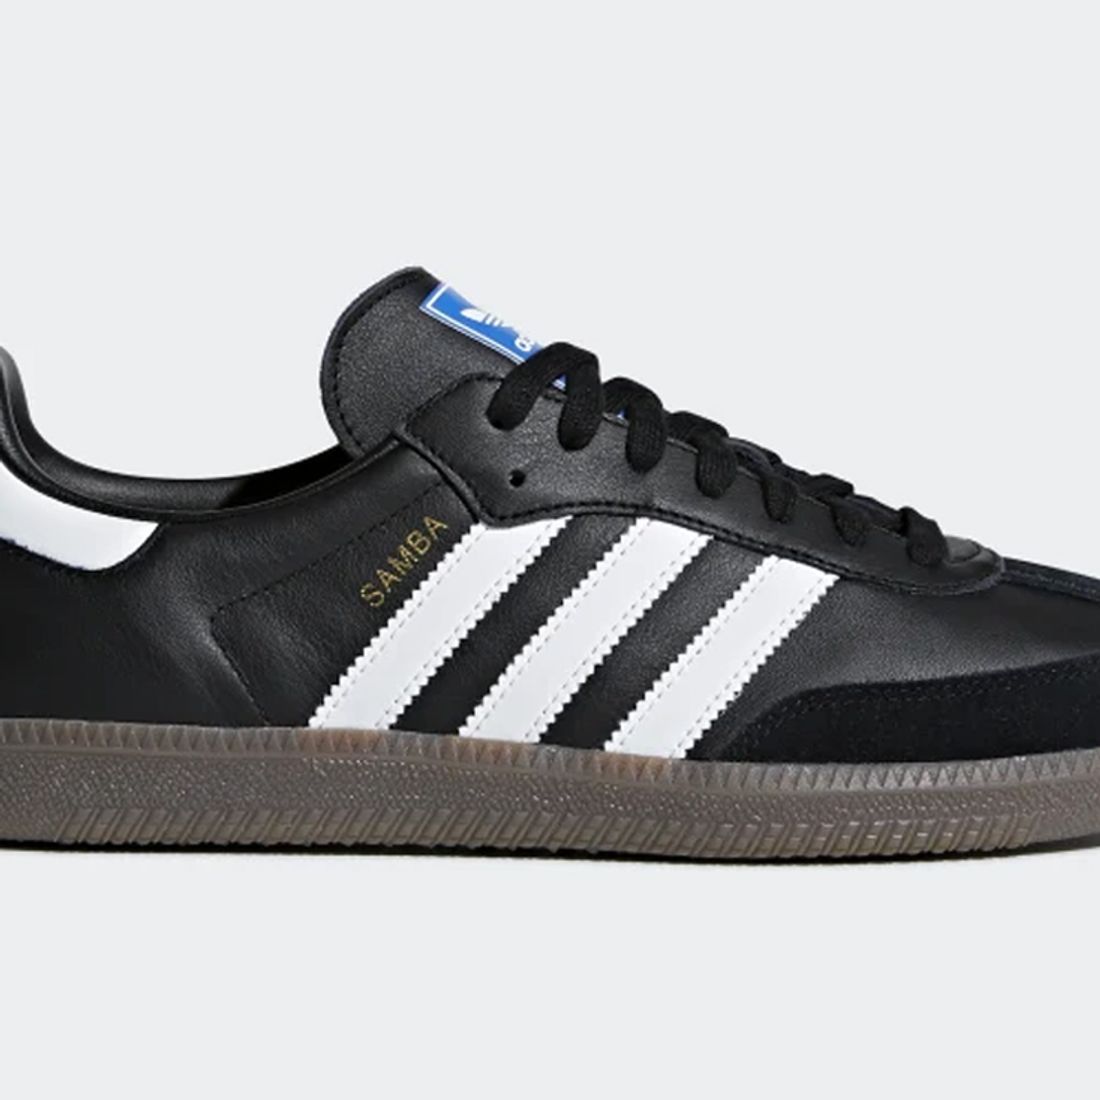 to 'Scale Up Volumes' of the Samba, Gazelle Campus in 2023 - Sneaker Freaker